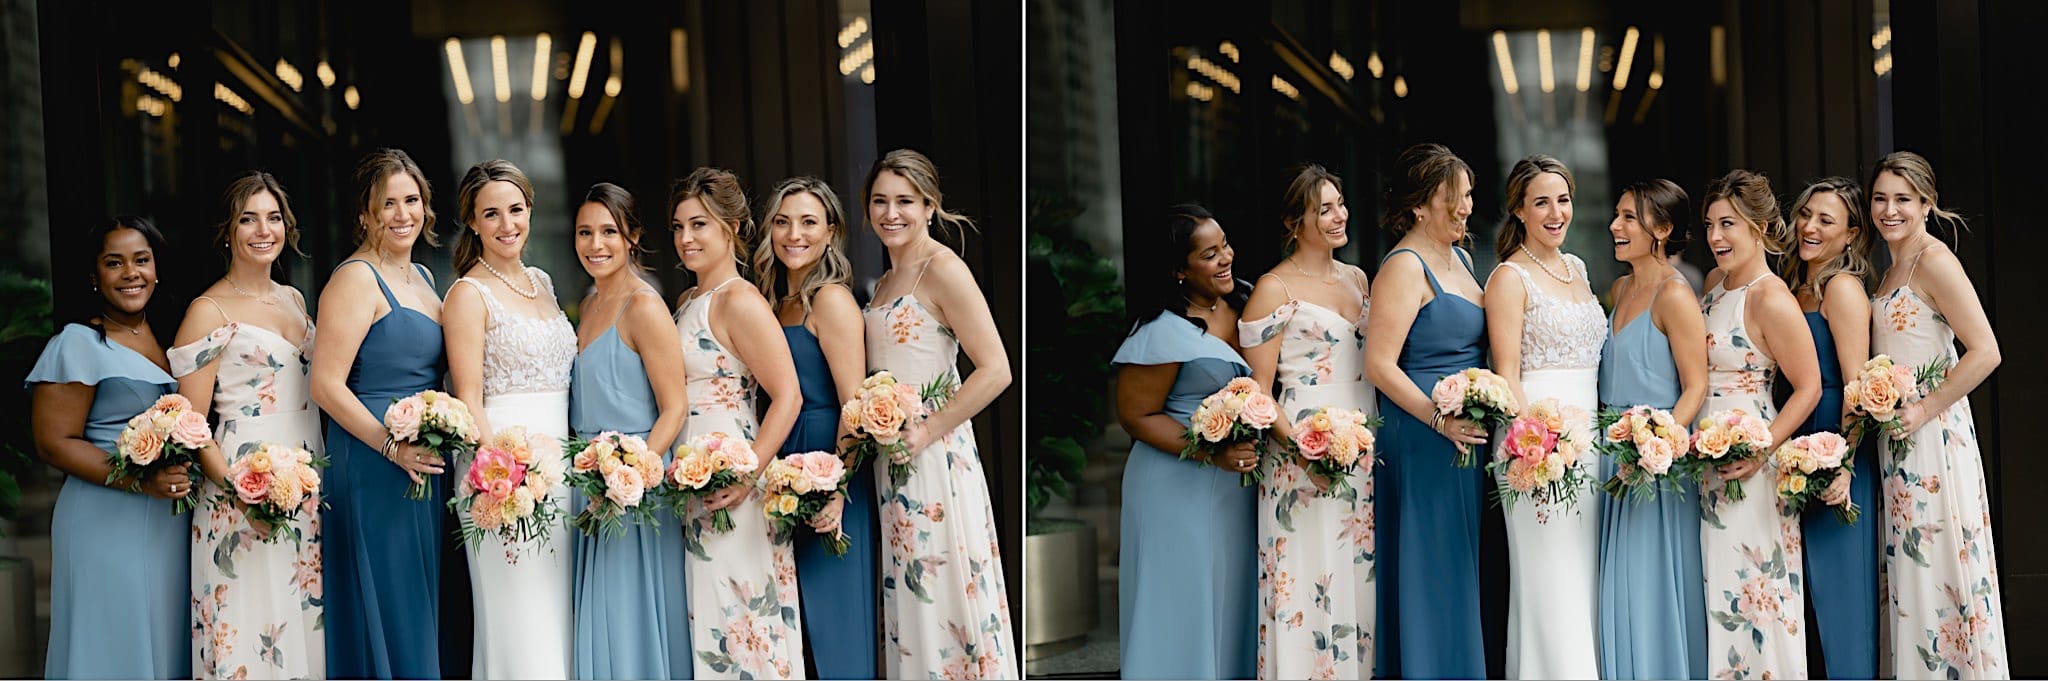 bride and bridesmaid photos in downtown Chicago